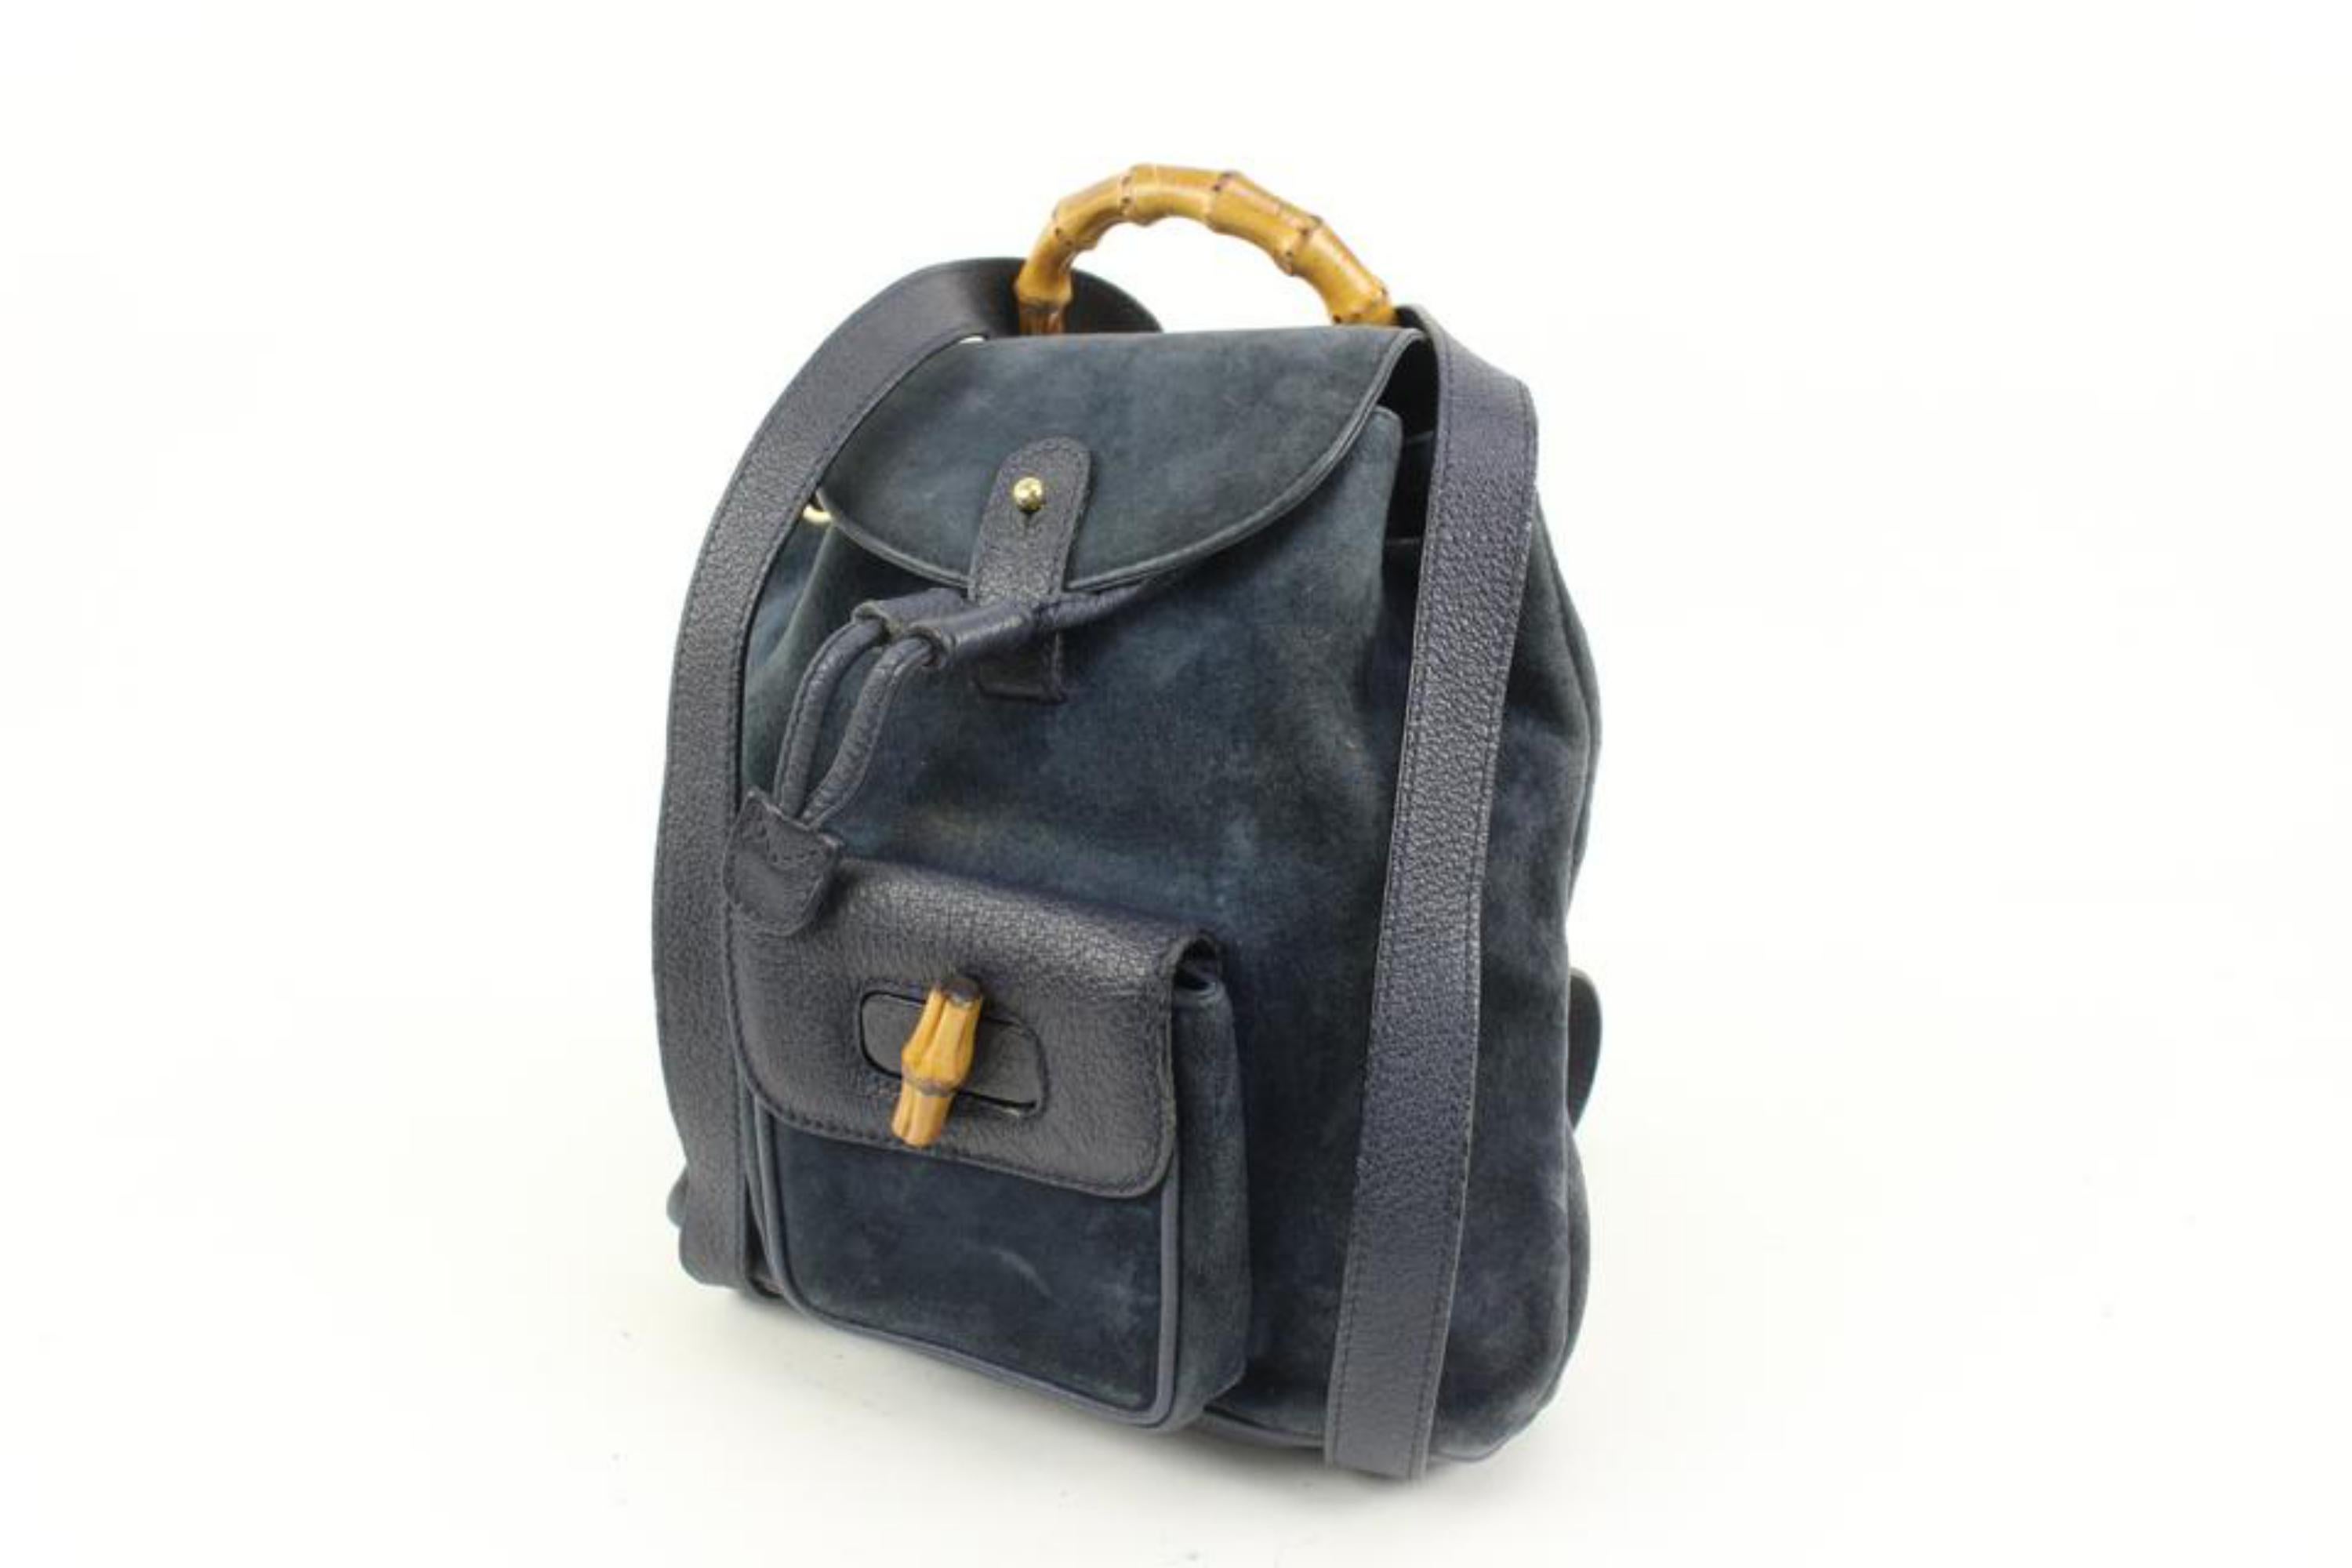 Gucci Navy Suede Bamboo Mini Backpack 56gz421s
Date Code/Serial Number: 003-8030 1705
Made In: Italy
Measurements: Length:  10.5